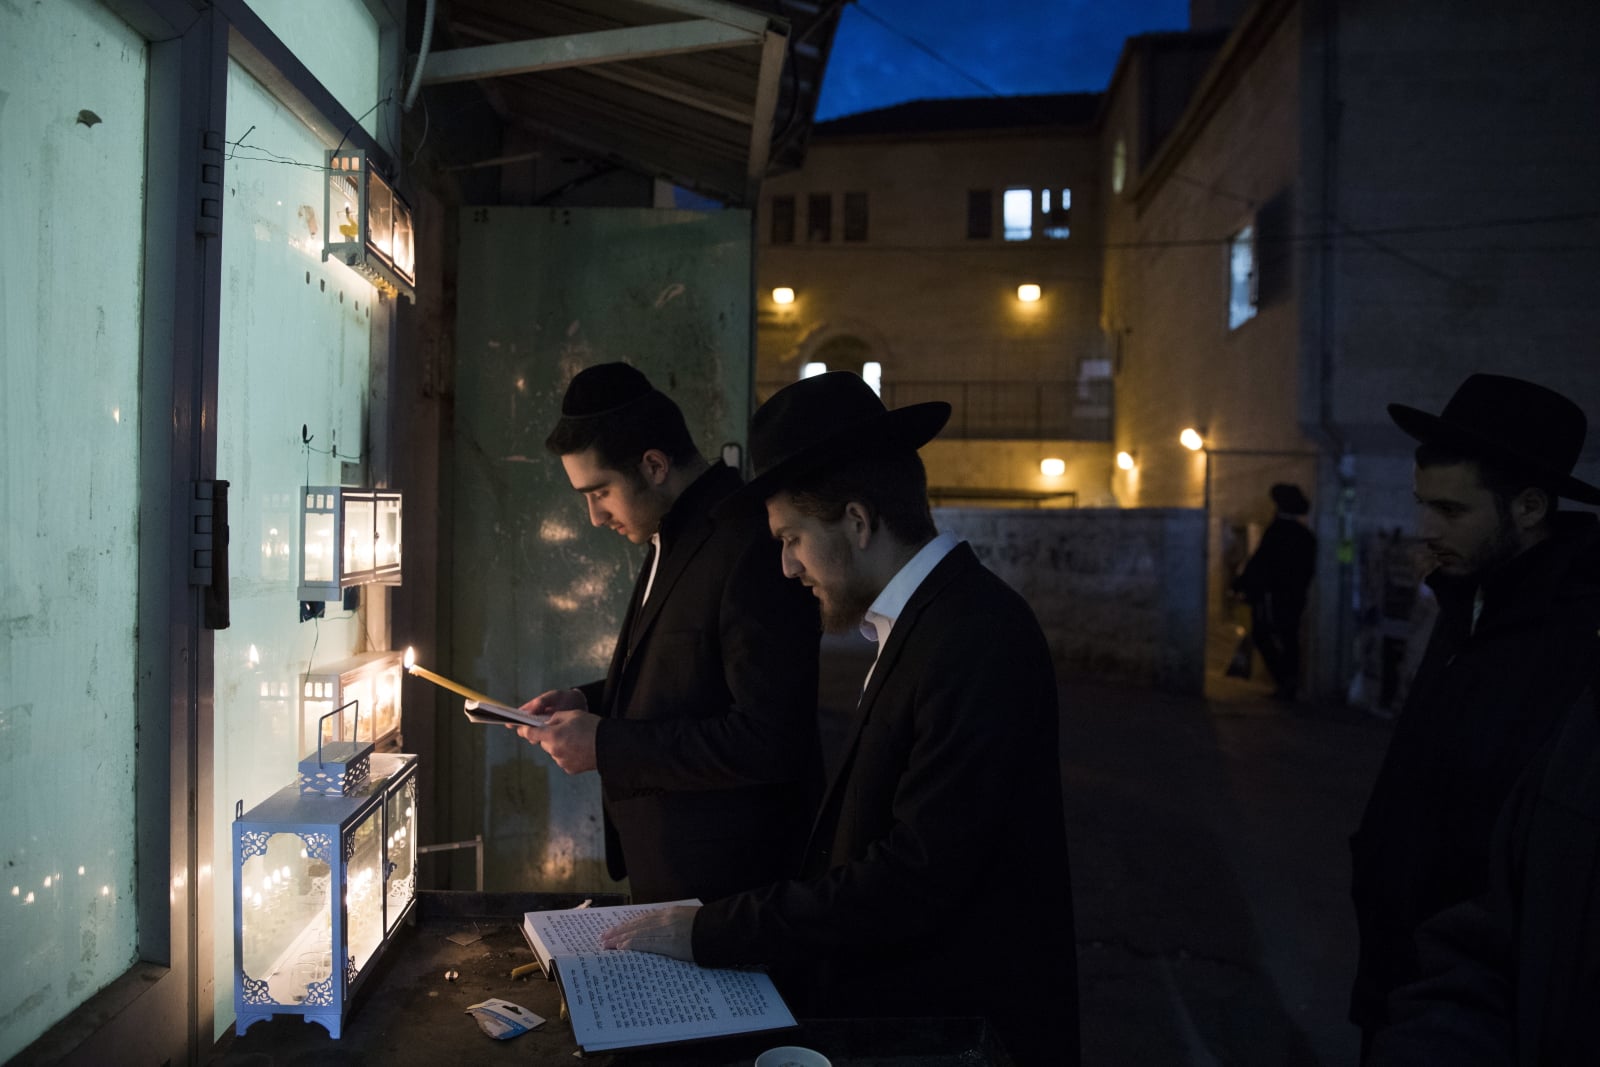 epa07210538 An Ultra-Orthodox Jew lights a Hanukkah candle outside his house during the Jewish holiday of Hanukkah in the Mea Shearim neighbourhood of Jerusalem, Israel, 05 December 2018. Hanukkah, also known as the 'Festival of Lights', is one of the most important Jewish holidays and is celebrated by Jews worldwide. Hanukkah began in the evening of 02 December and ends in the evening of 10 December.  EPA/ABIR SULTAN 
Dostawca: PAP/EPA.